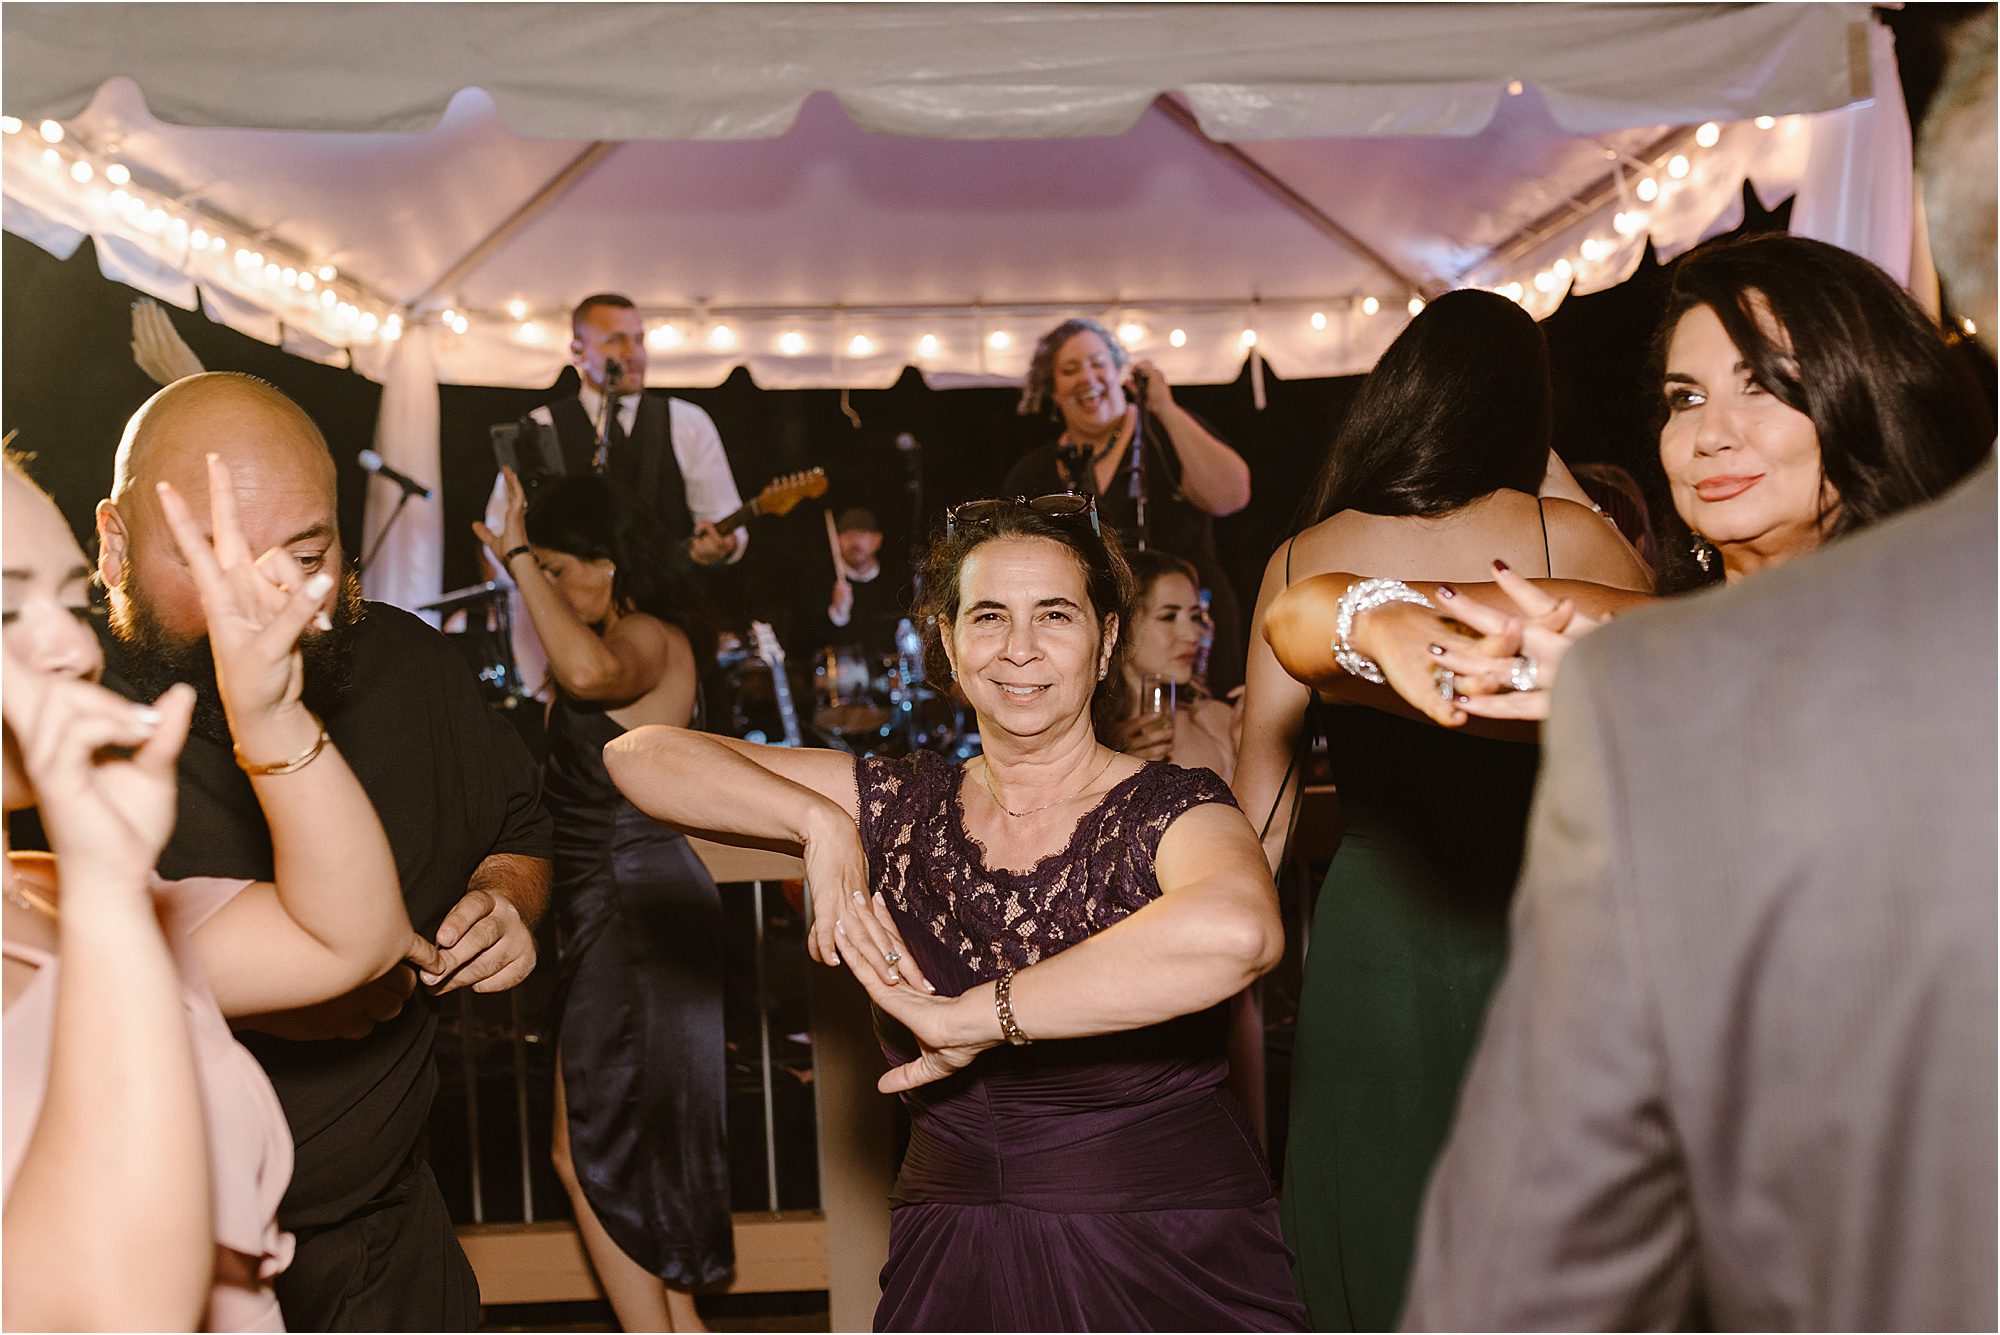 wedding guests dance on dance floor at wedding reception with live band